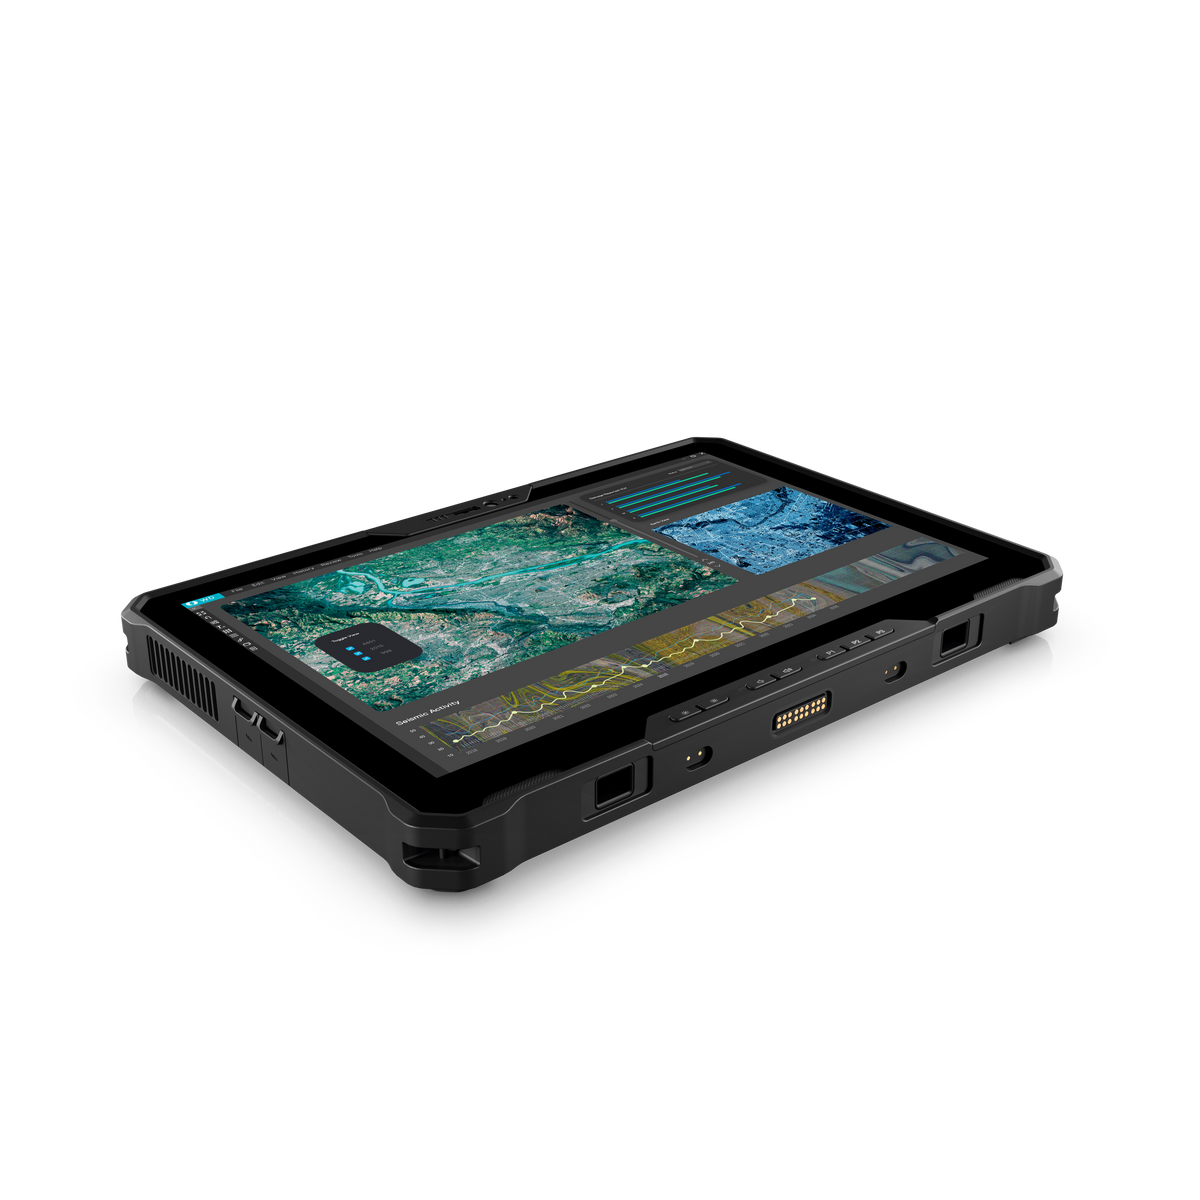 Harmoni Betinget Habubu Dell Latitude 7230 Rugged Extreme announced with Intel Alder Lake vPro  processors, a 16:10 screen and loads of accessories - NotebookCheck.net News